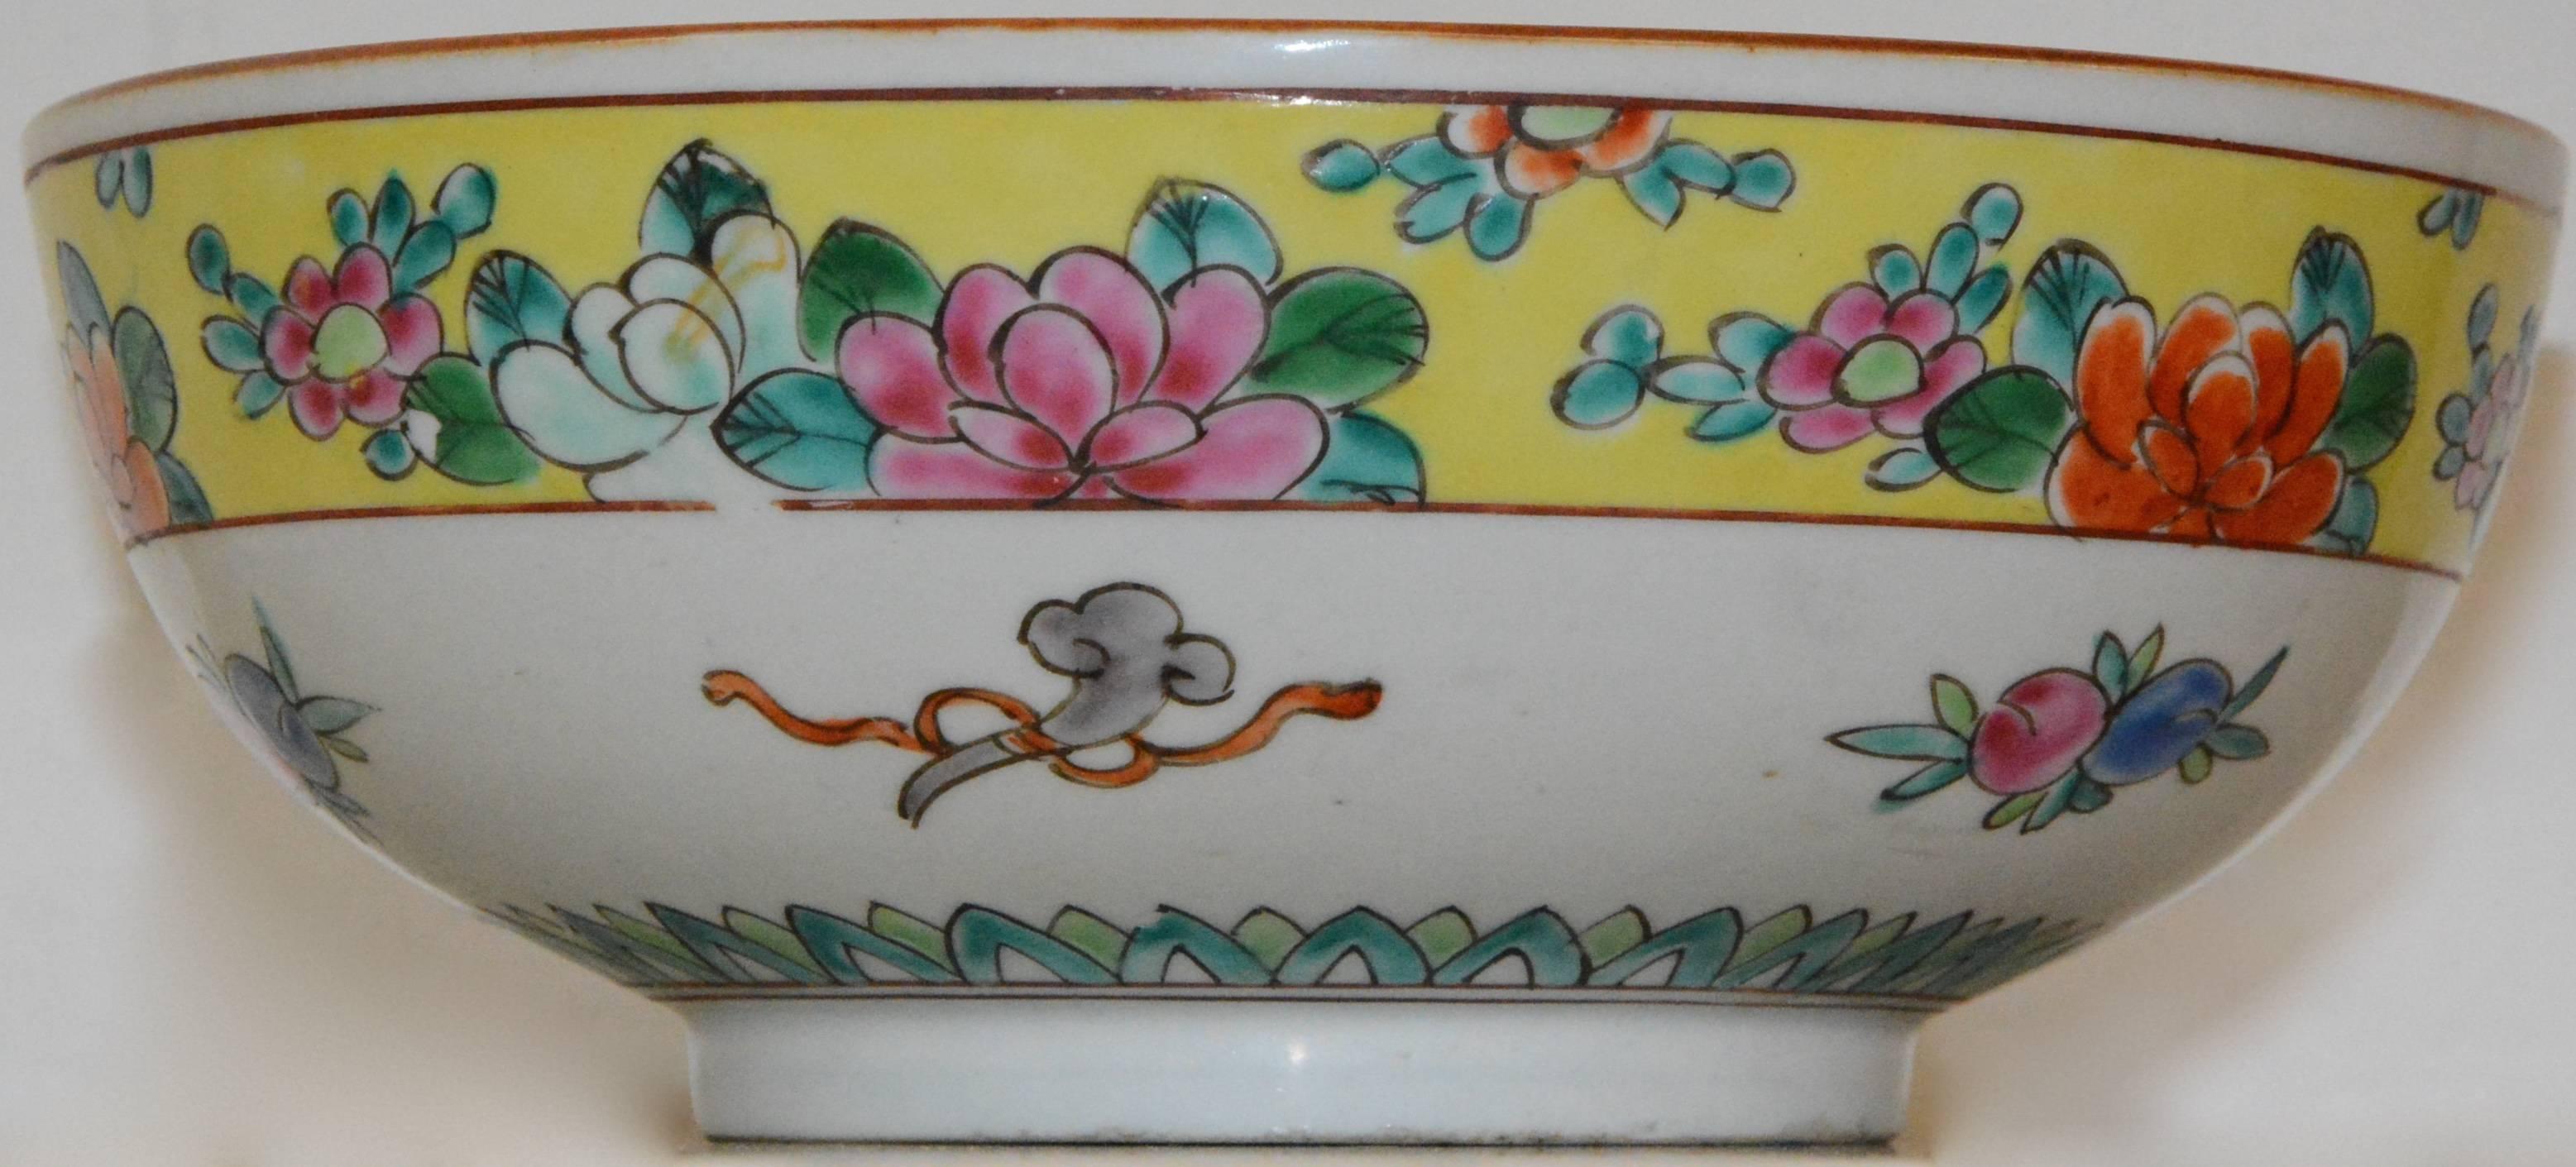 Vibrant colors reach out and grab you in this lovely bowl we are offering you. Yellow is the main theme with multicolored flowers adorning the piece. Nippon, which translates to Japan, is marked on the bottom.